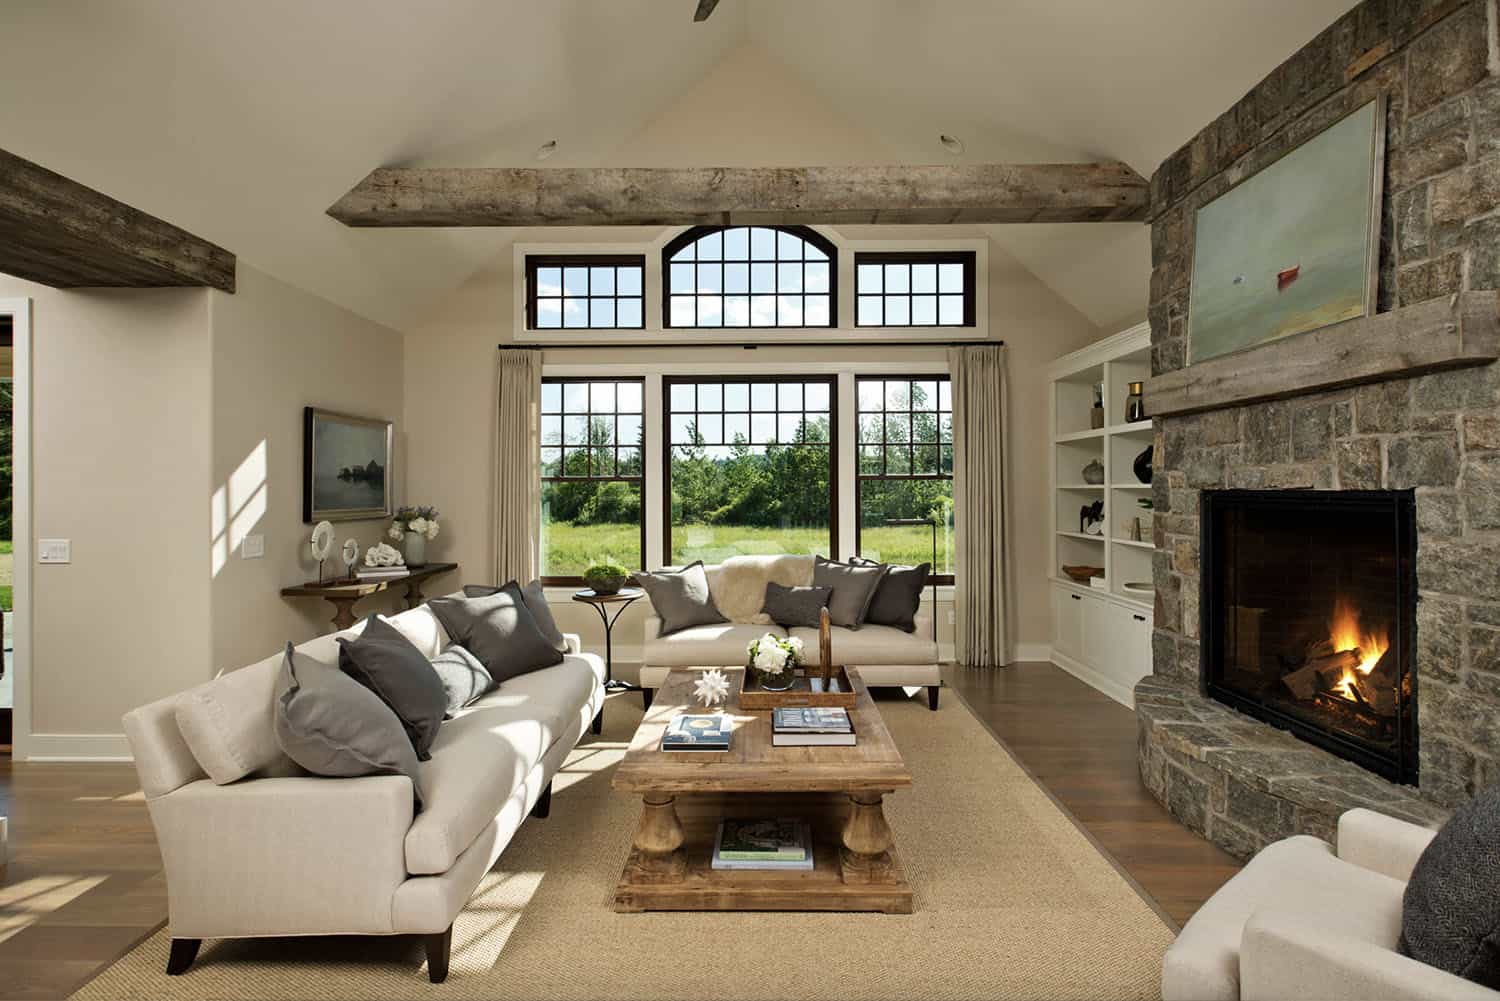 See inside this stunning New York dream house with rustic touches